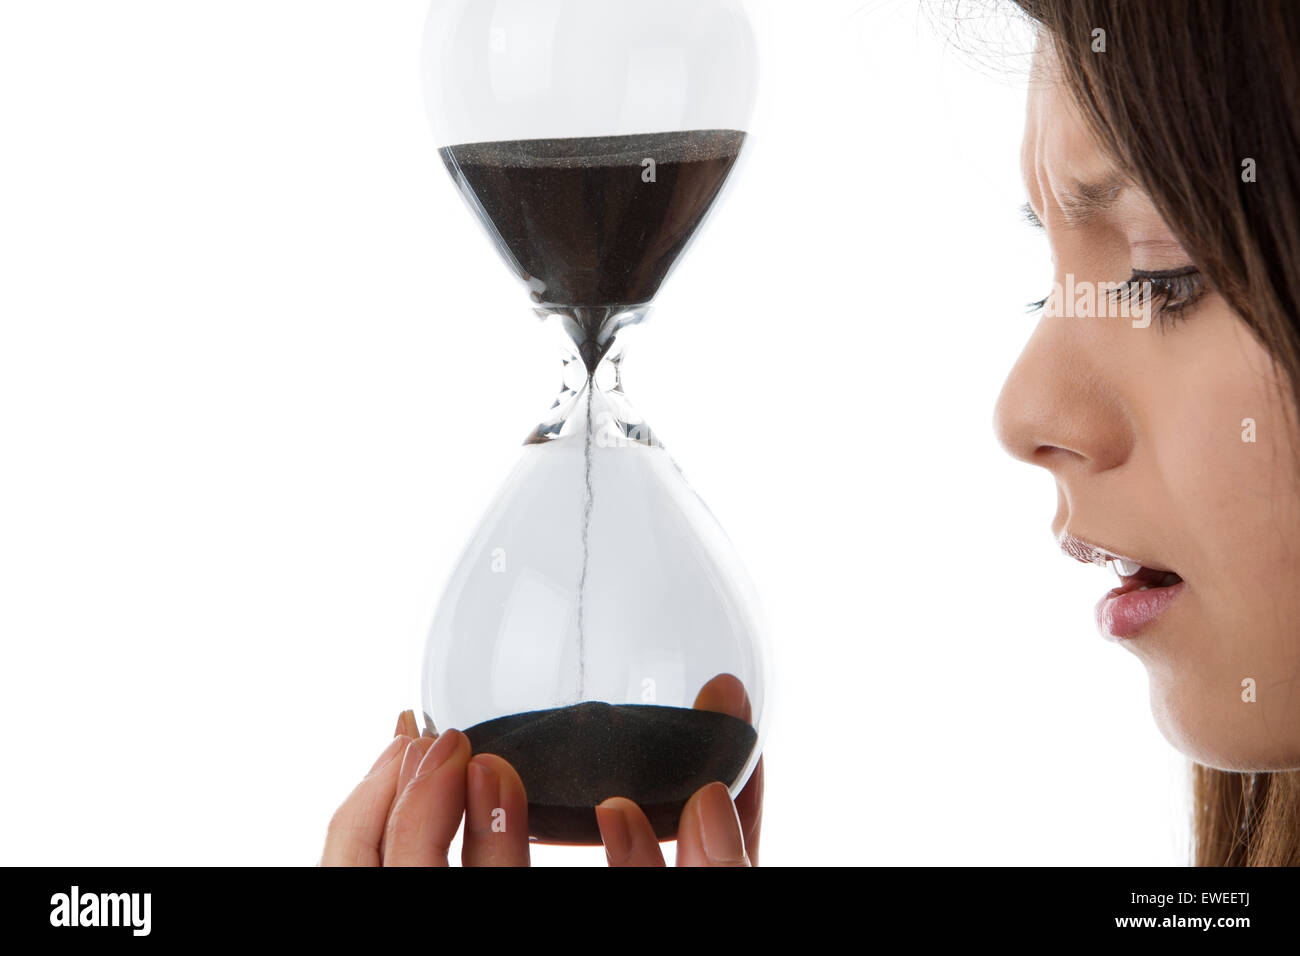 woman holding up a hour glass sand timer watching time slip away Stock Photo